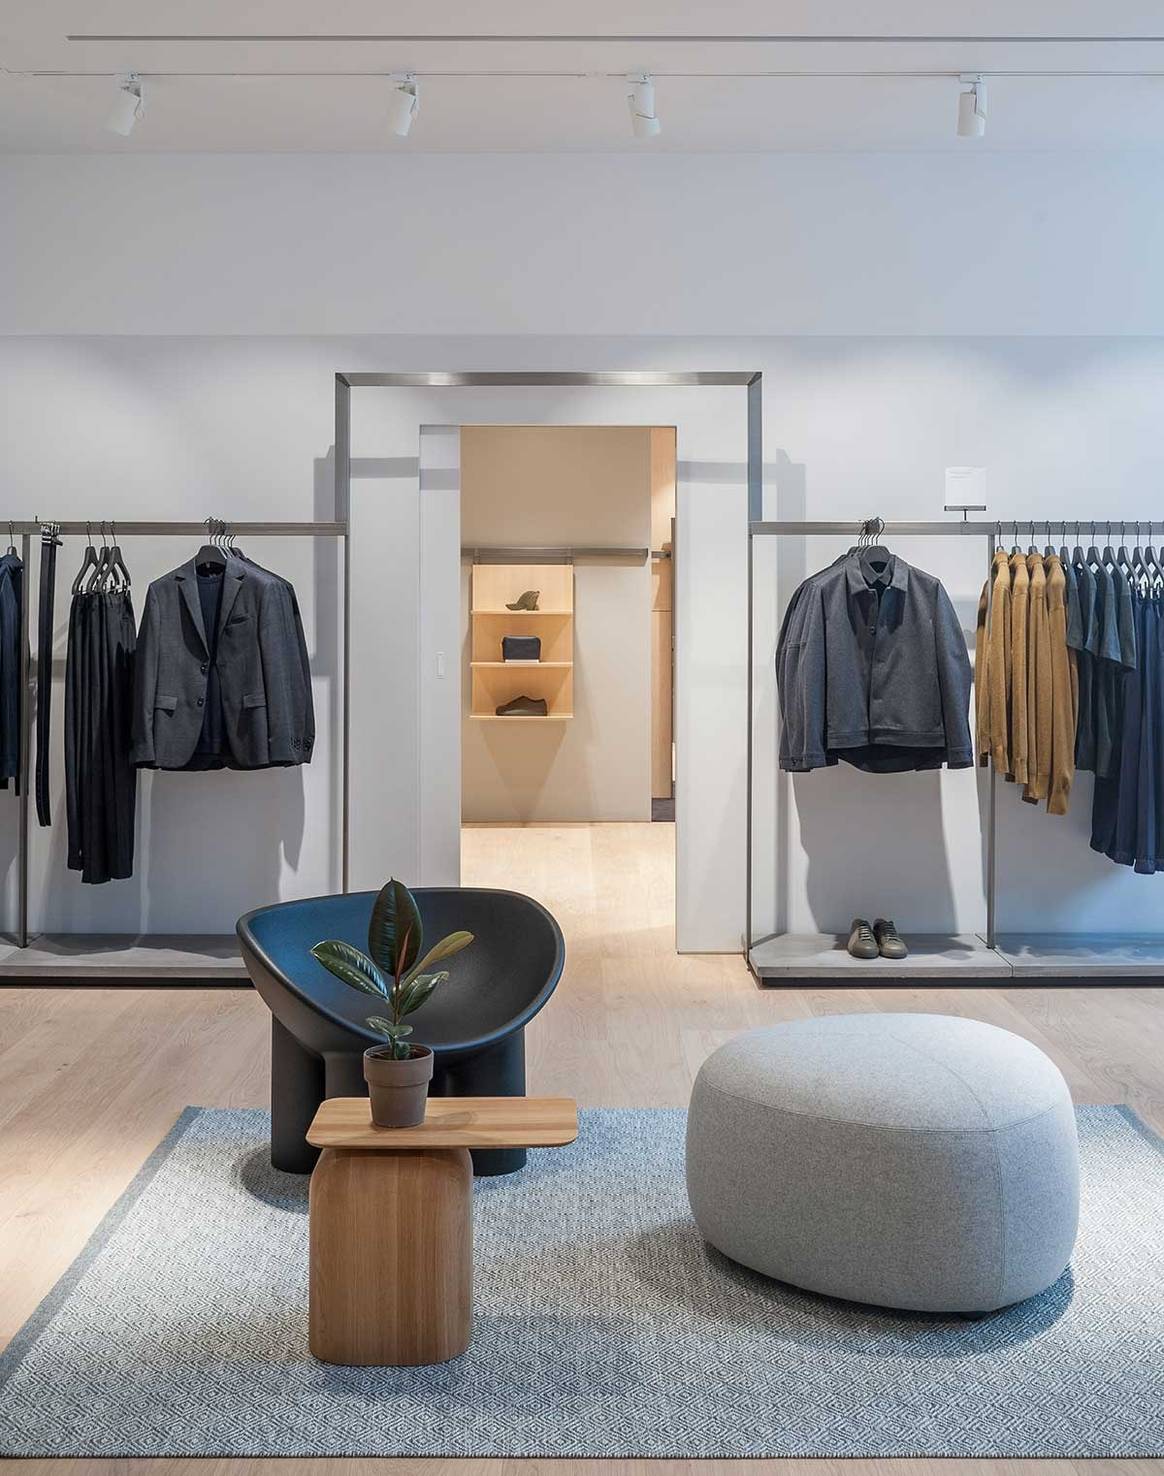 In Pictures: Cos opens first store in Edinburgh